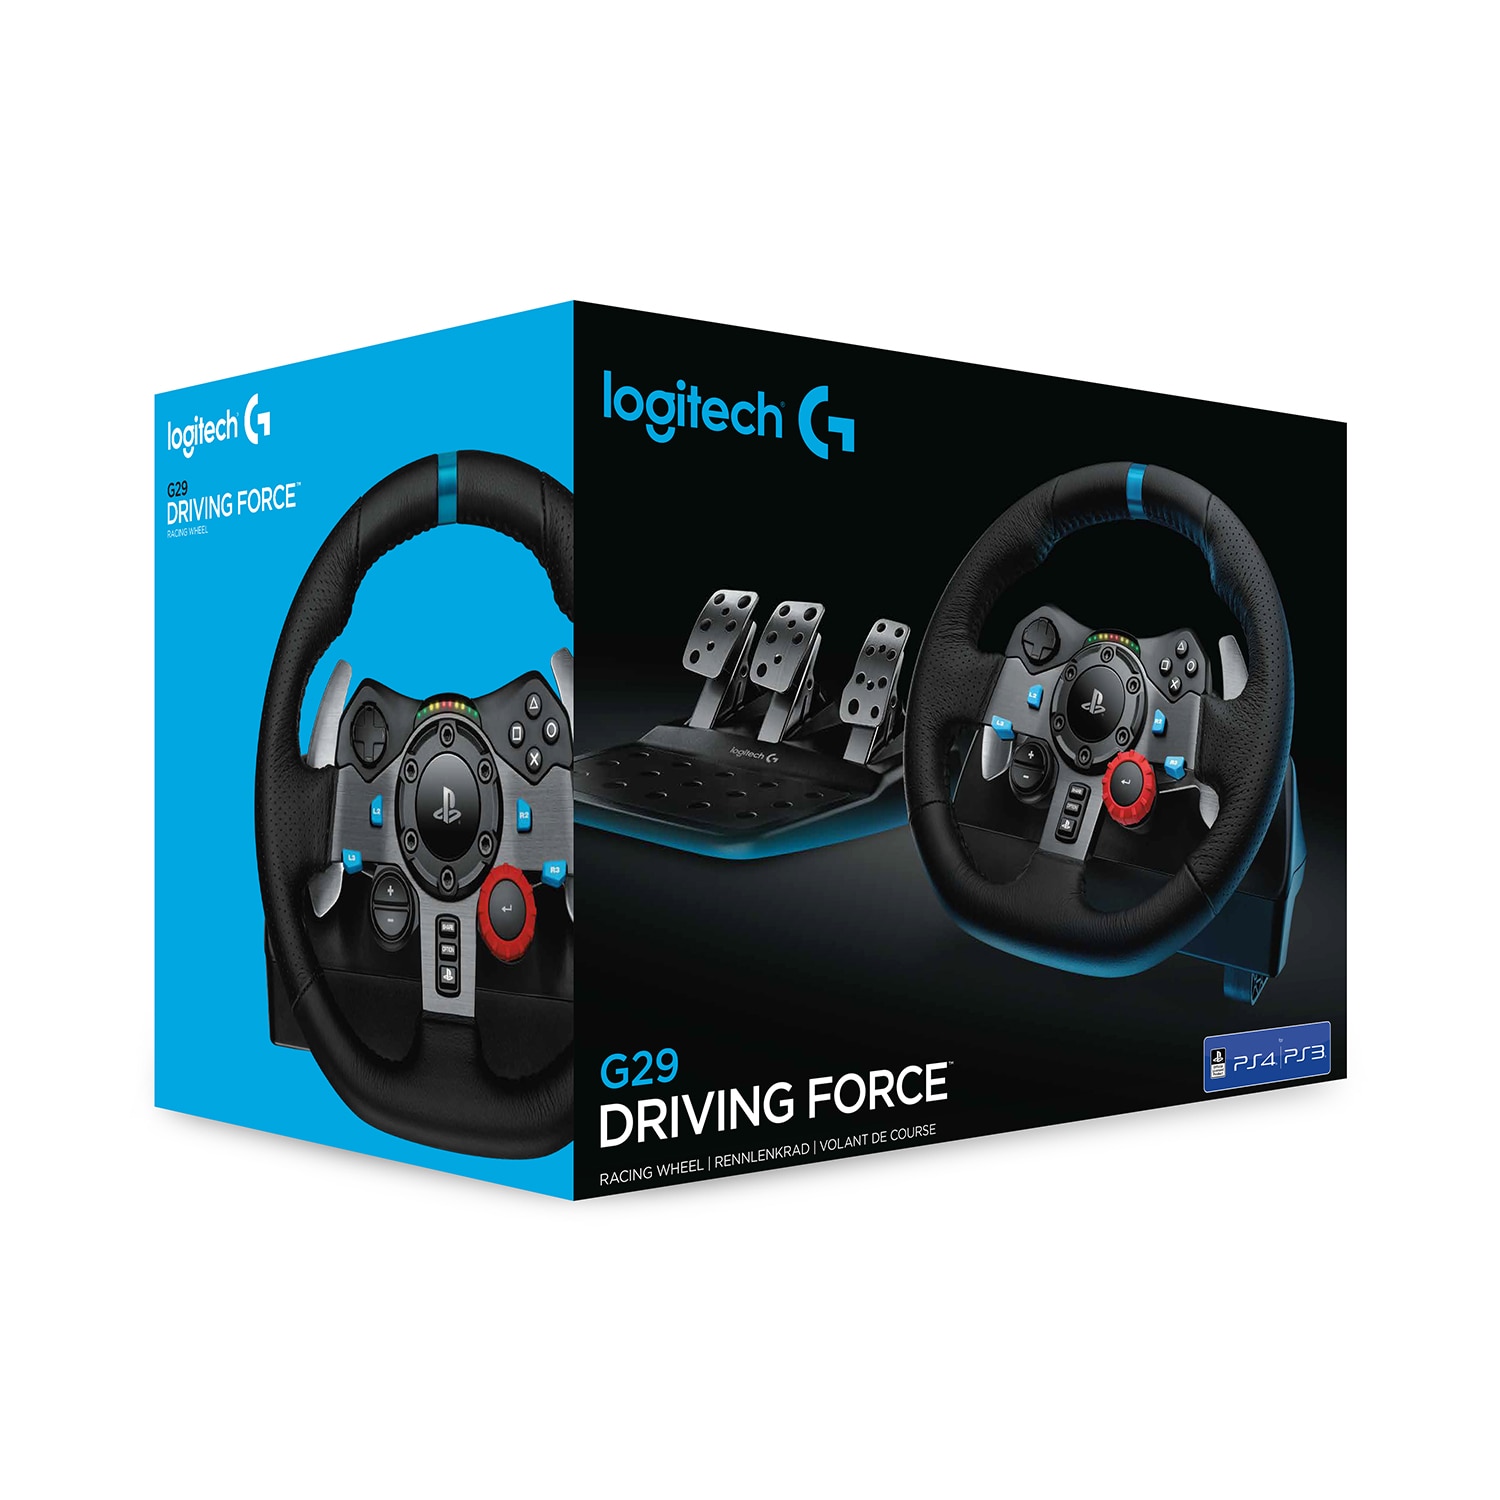 Cursed staff Mentally Volan Logitech Driving Force G29 pentru Playstation 5, Playstation 4,  Playstation 3, PC - eMAG.ro